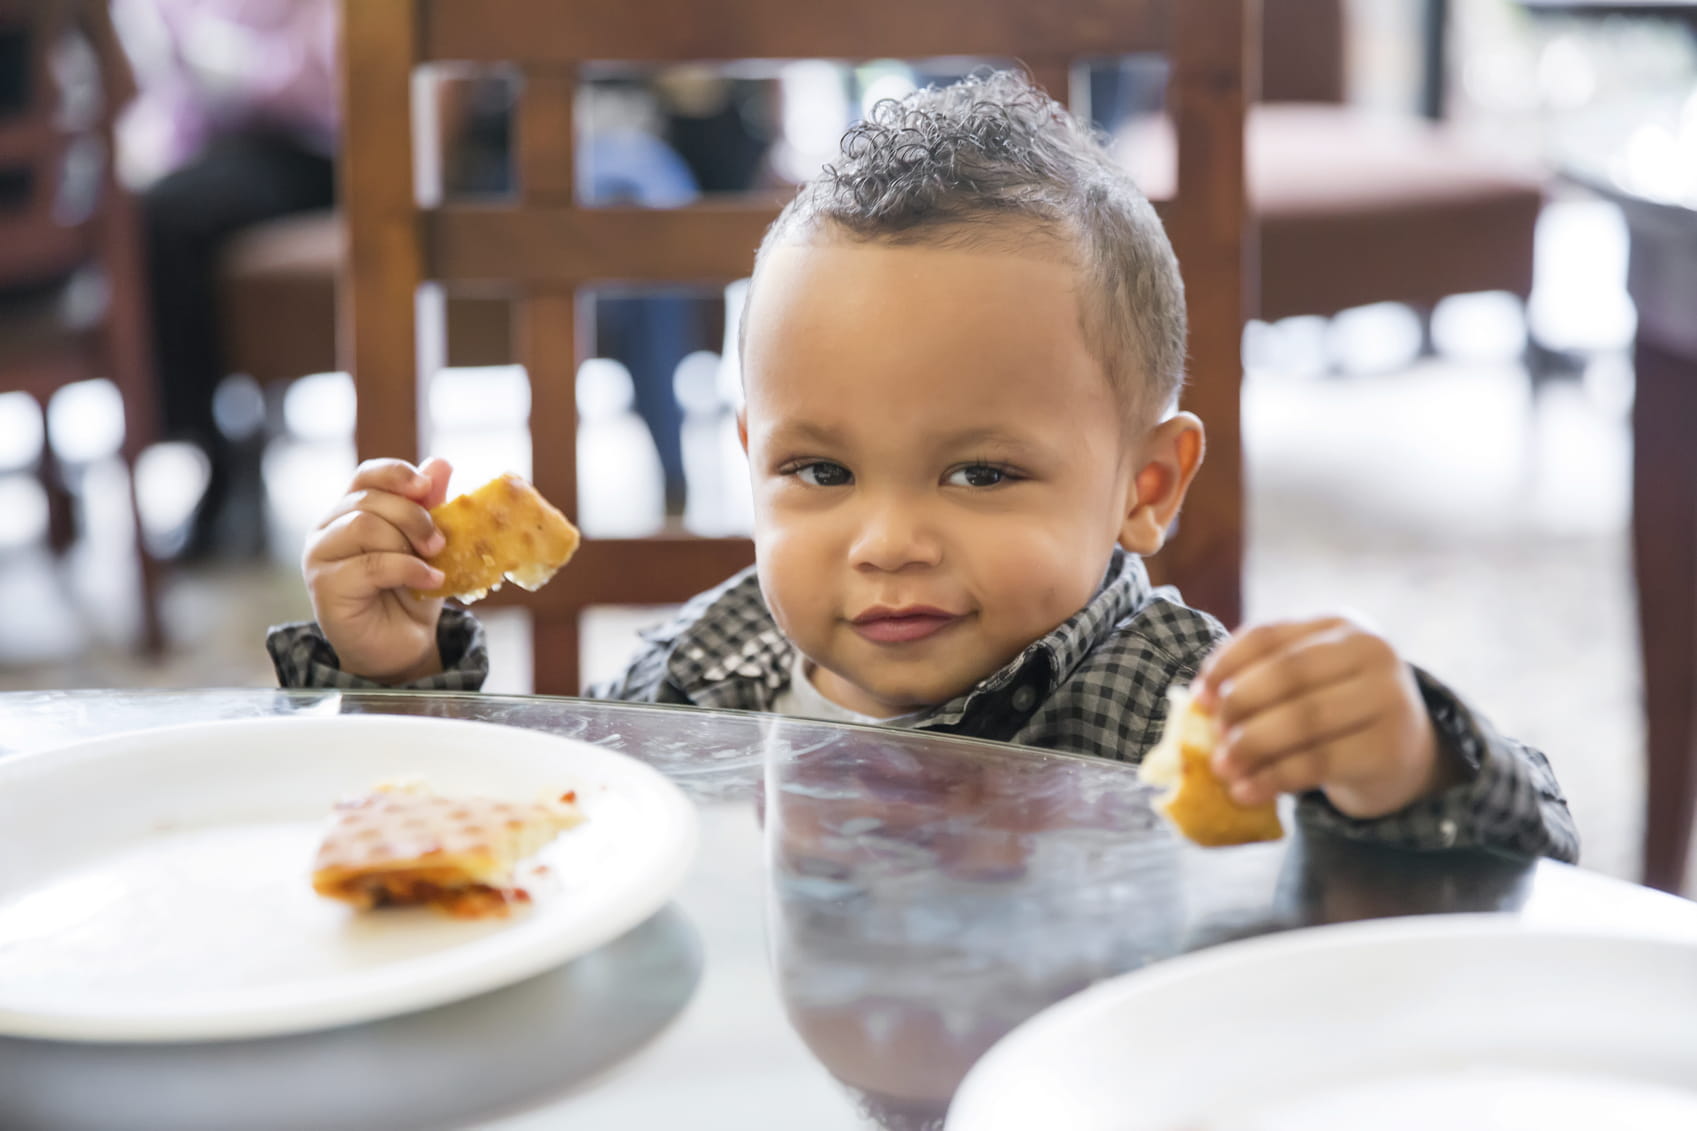 Make dining out pleasant for you, your toddler, and the table next to you. Photo © Jodi Jacobson